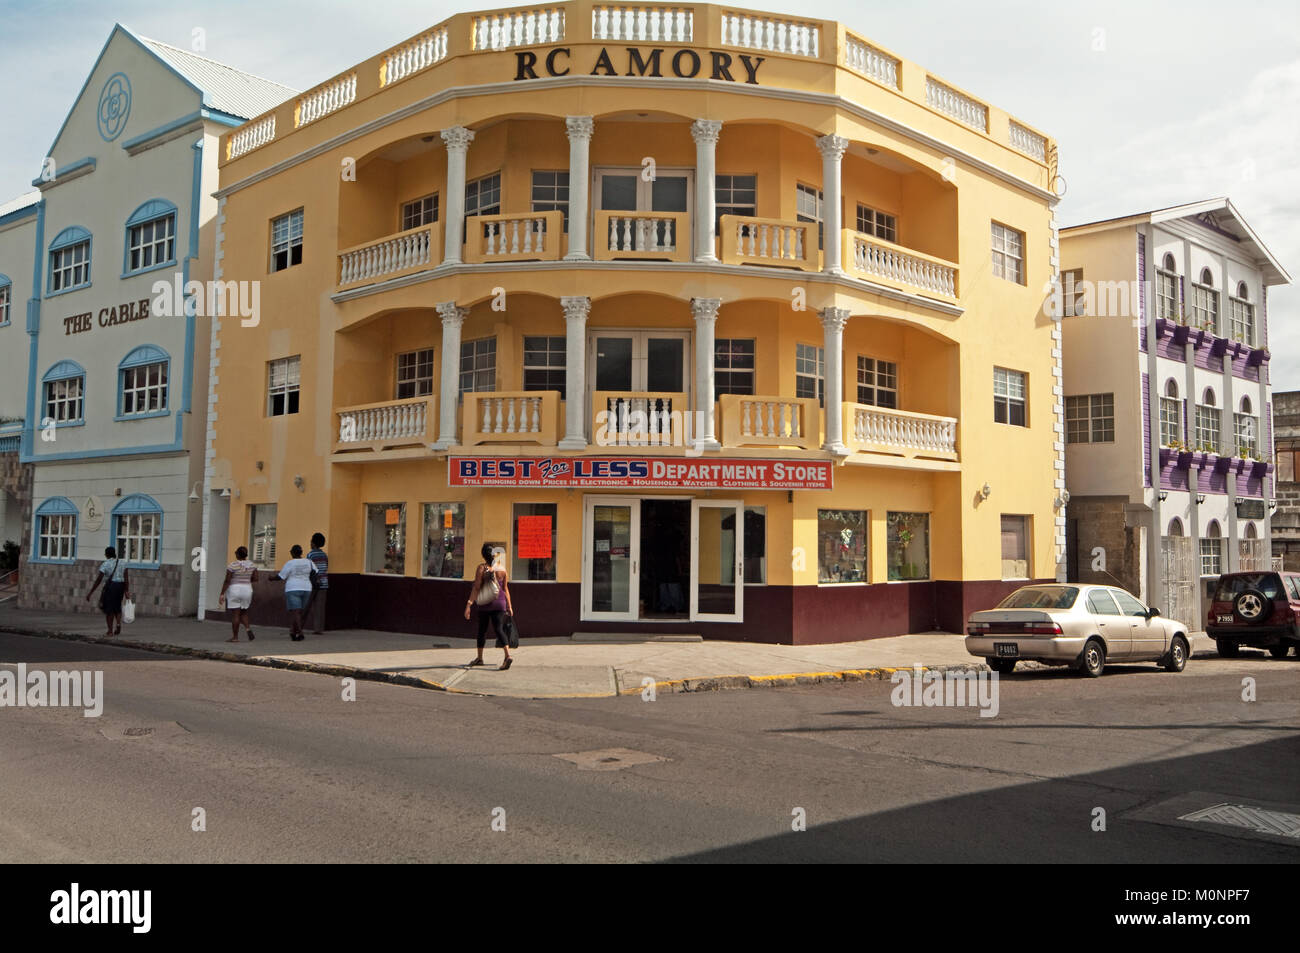 Basseterre, Cafe, St Kitts, Caribbean, West Indies, Department Store Stock Photo